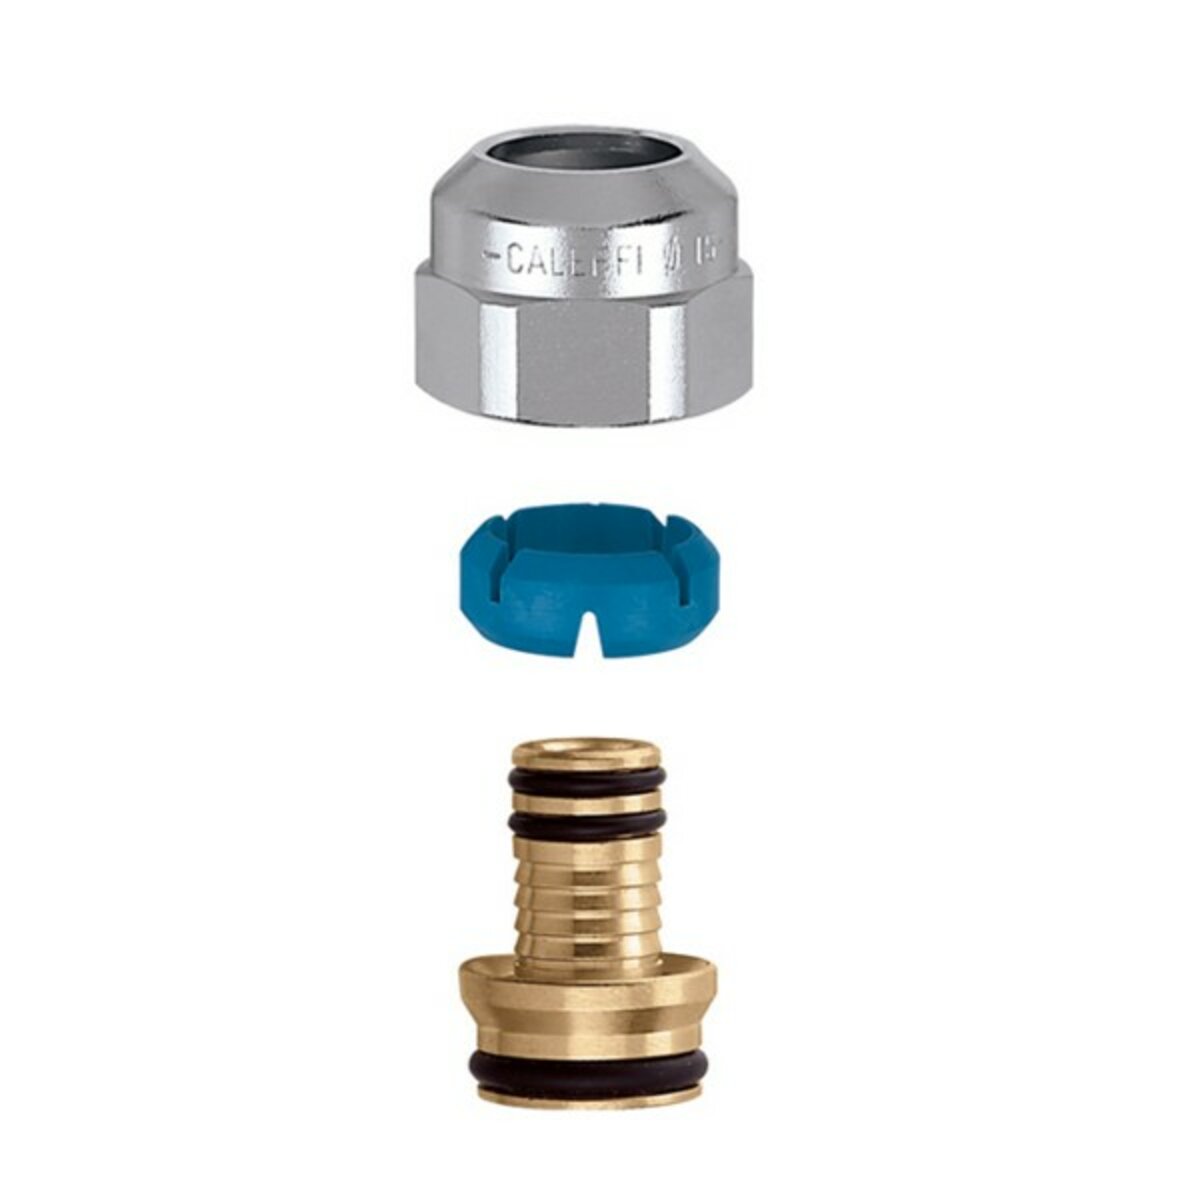 Multilayer fitting series 679 chrome 20x2 - 3/4 connections for Caleffi valves and lockshields